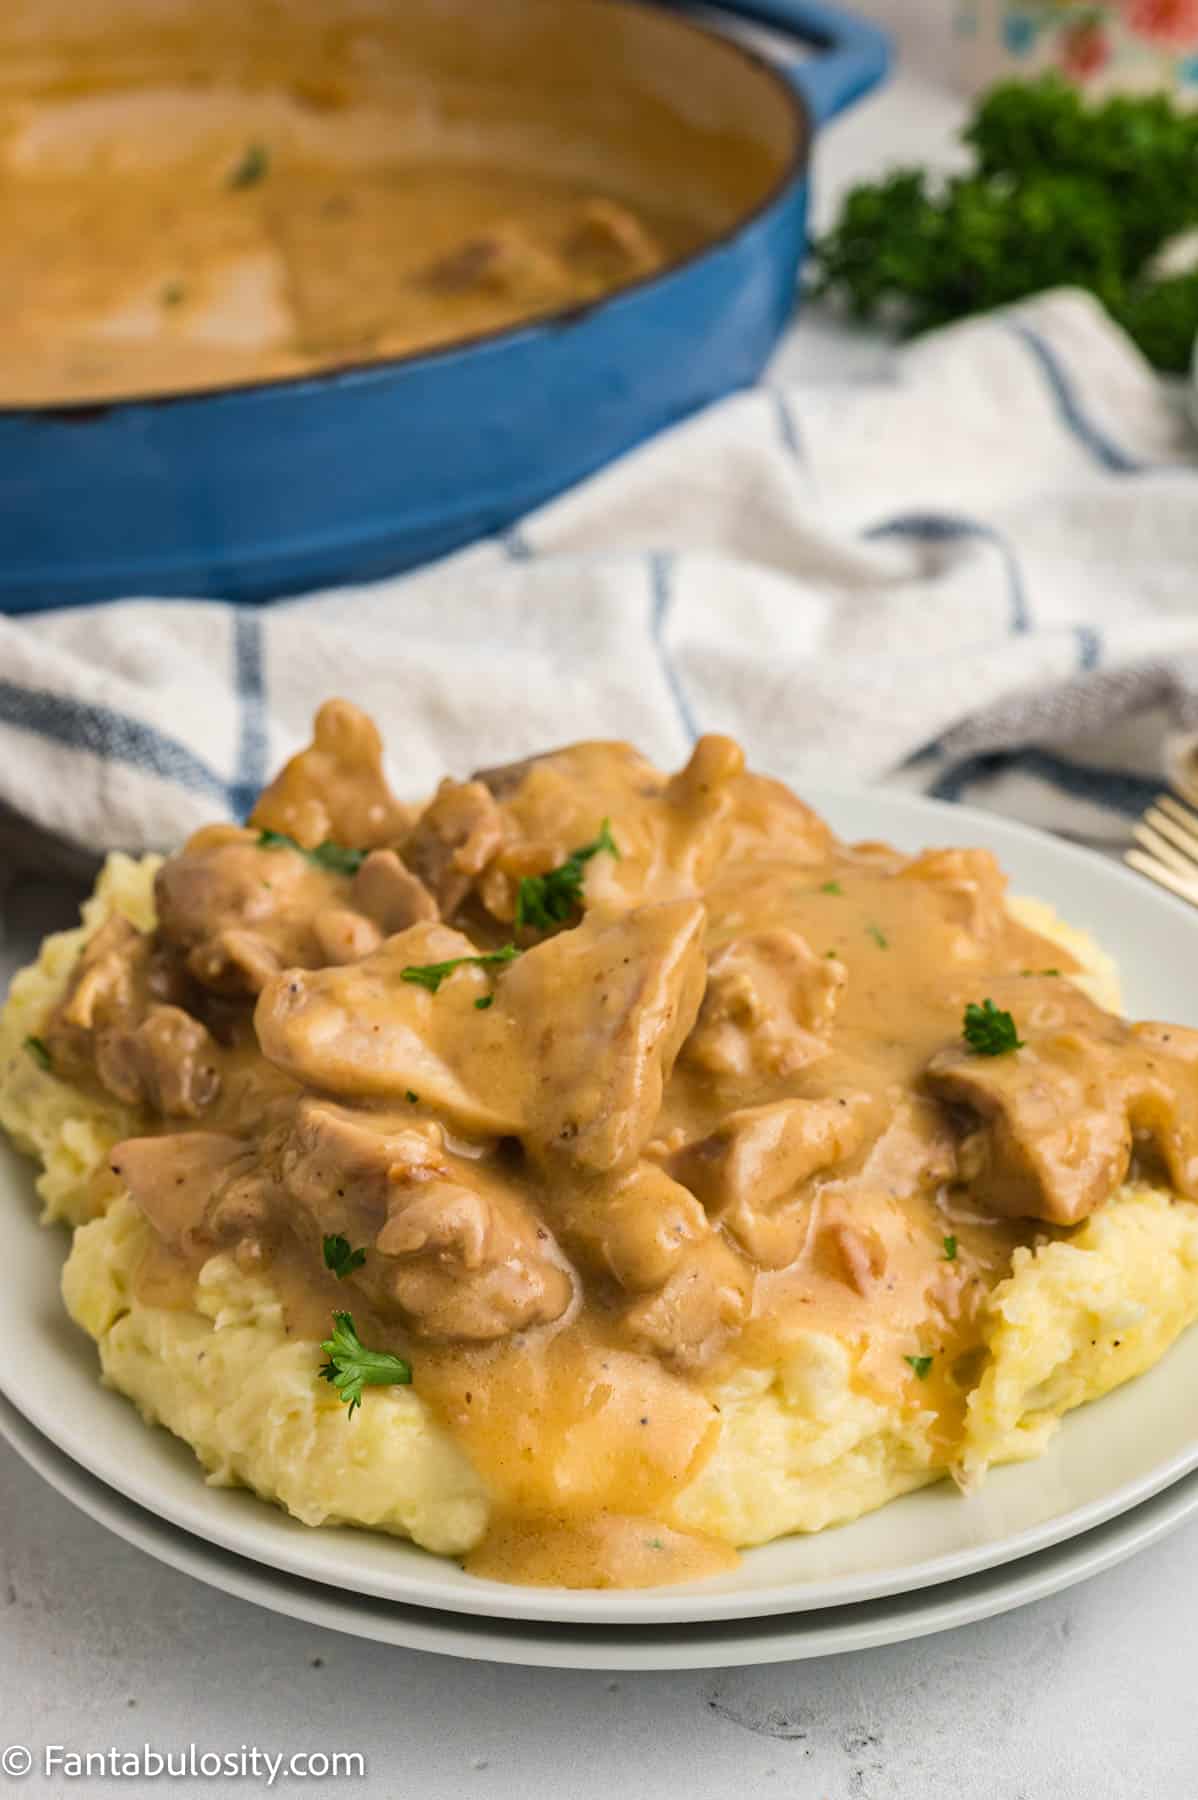 A white plate holds a serving of mashed potatoes smothered with a rich creamy chicken mixture